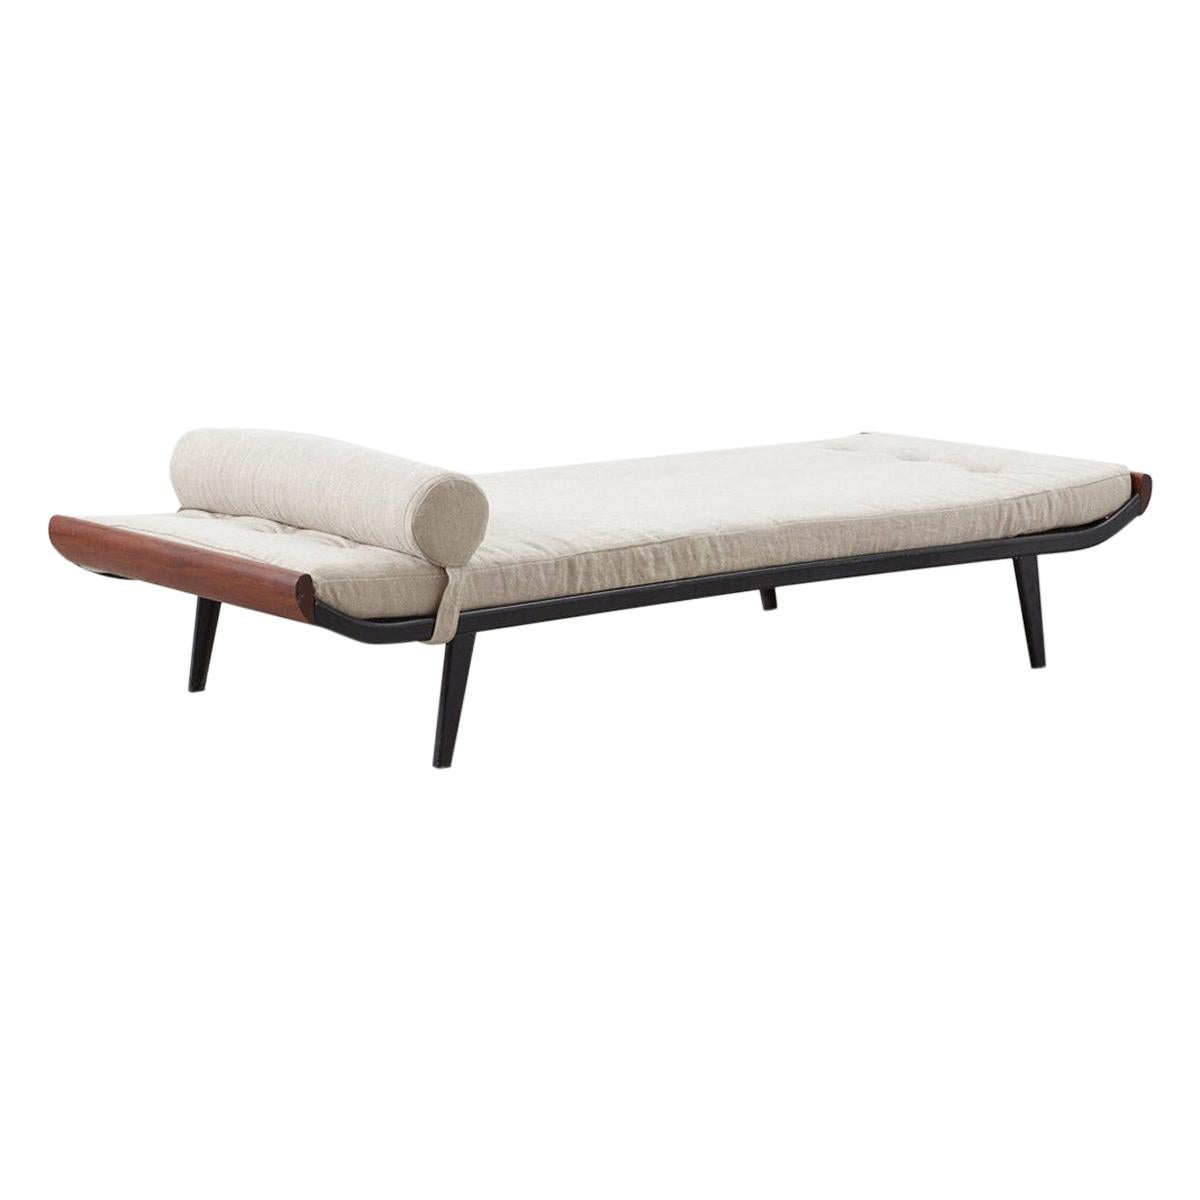 Dick Cordemeijer Cleopatra Daybed for Auping, Netherlands, circa 1960